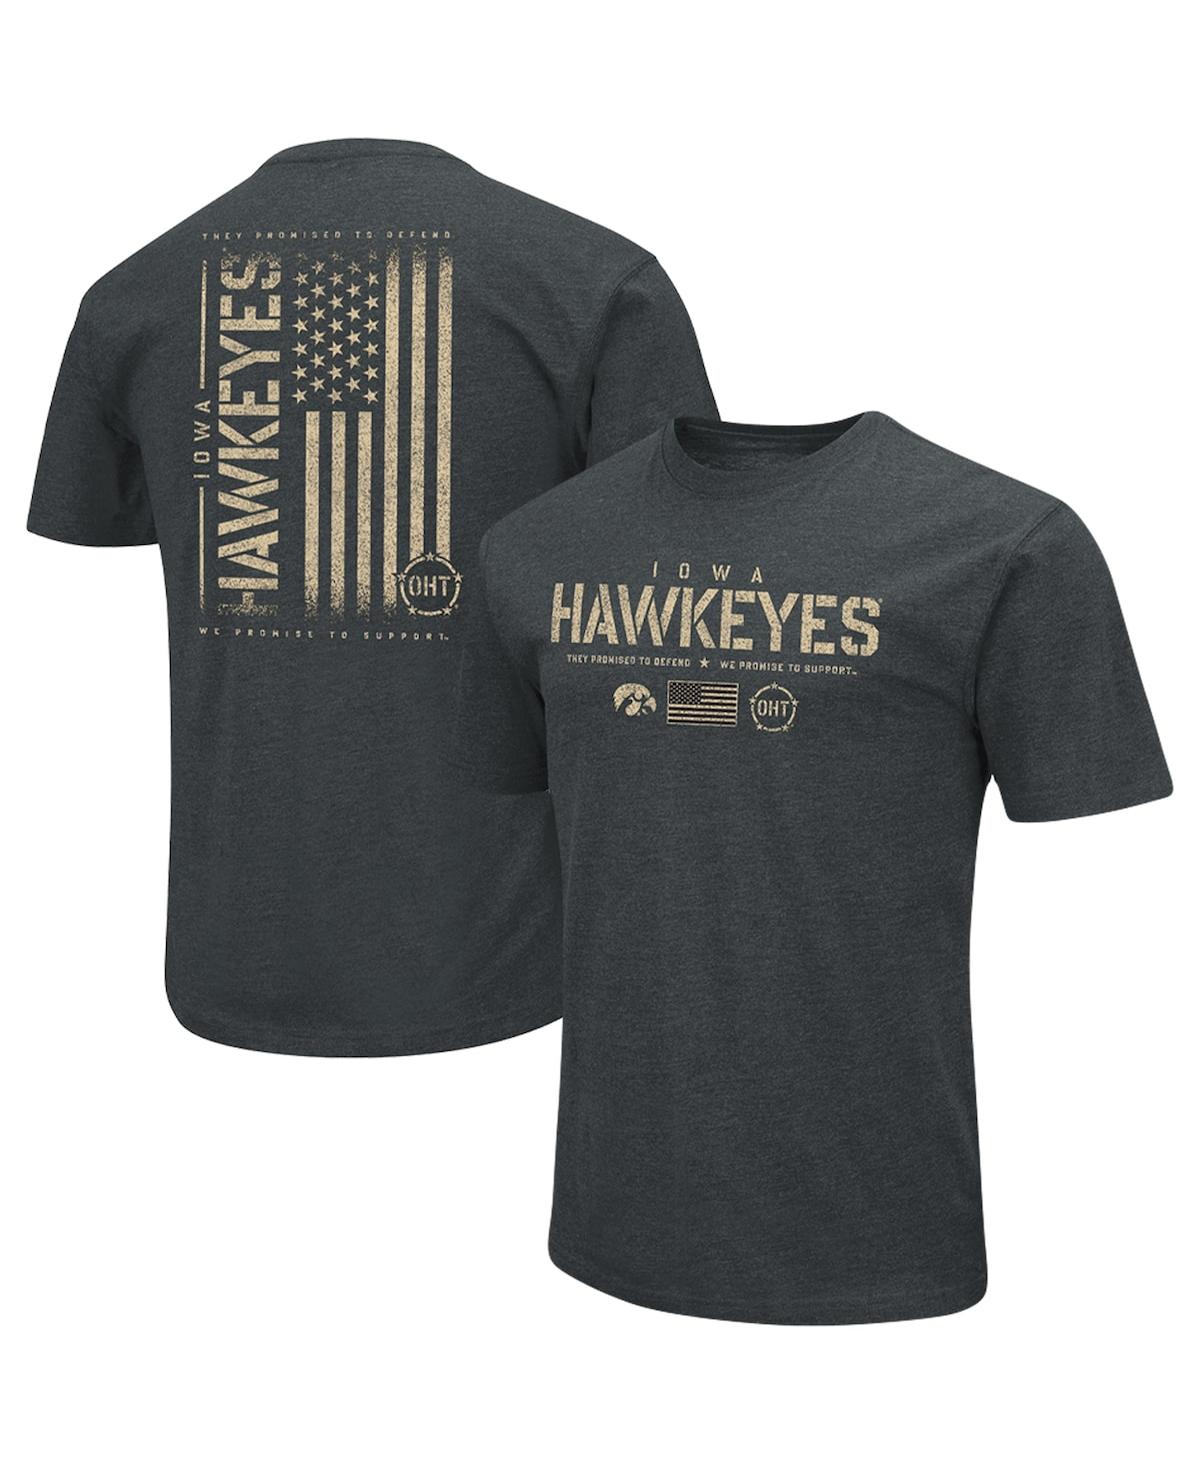 Shop Colosseum Men's  Heathered Black Iowa Hawkeyes Oht Military-inspired Appreciation Flag 2.0 T-shirt